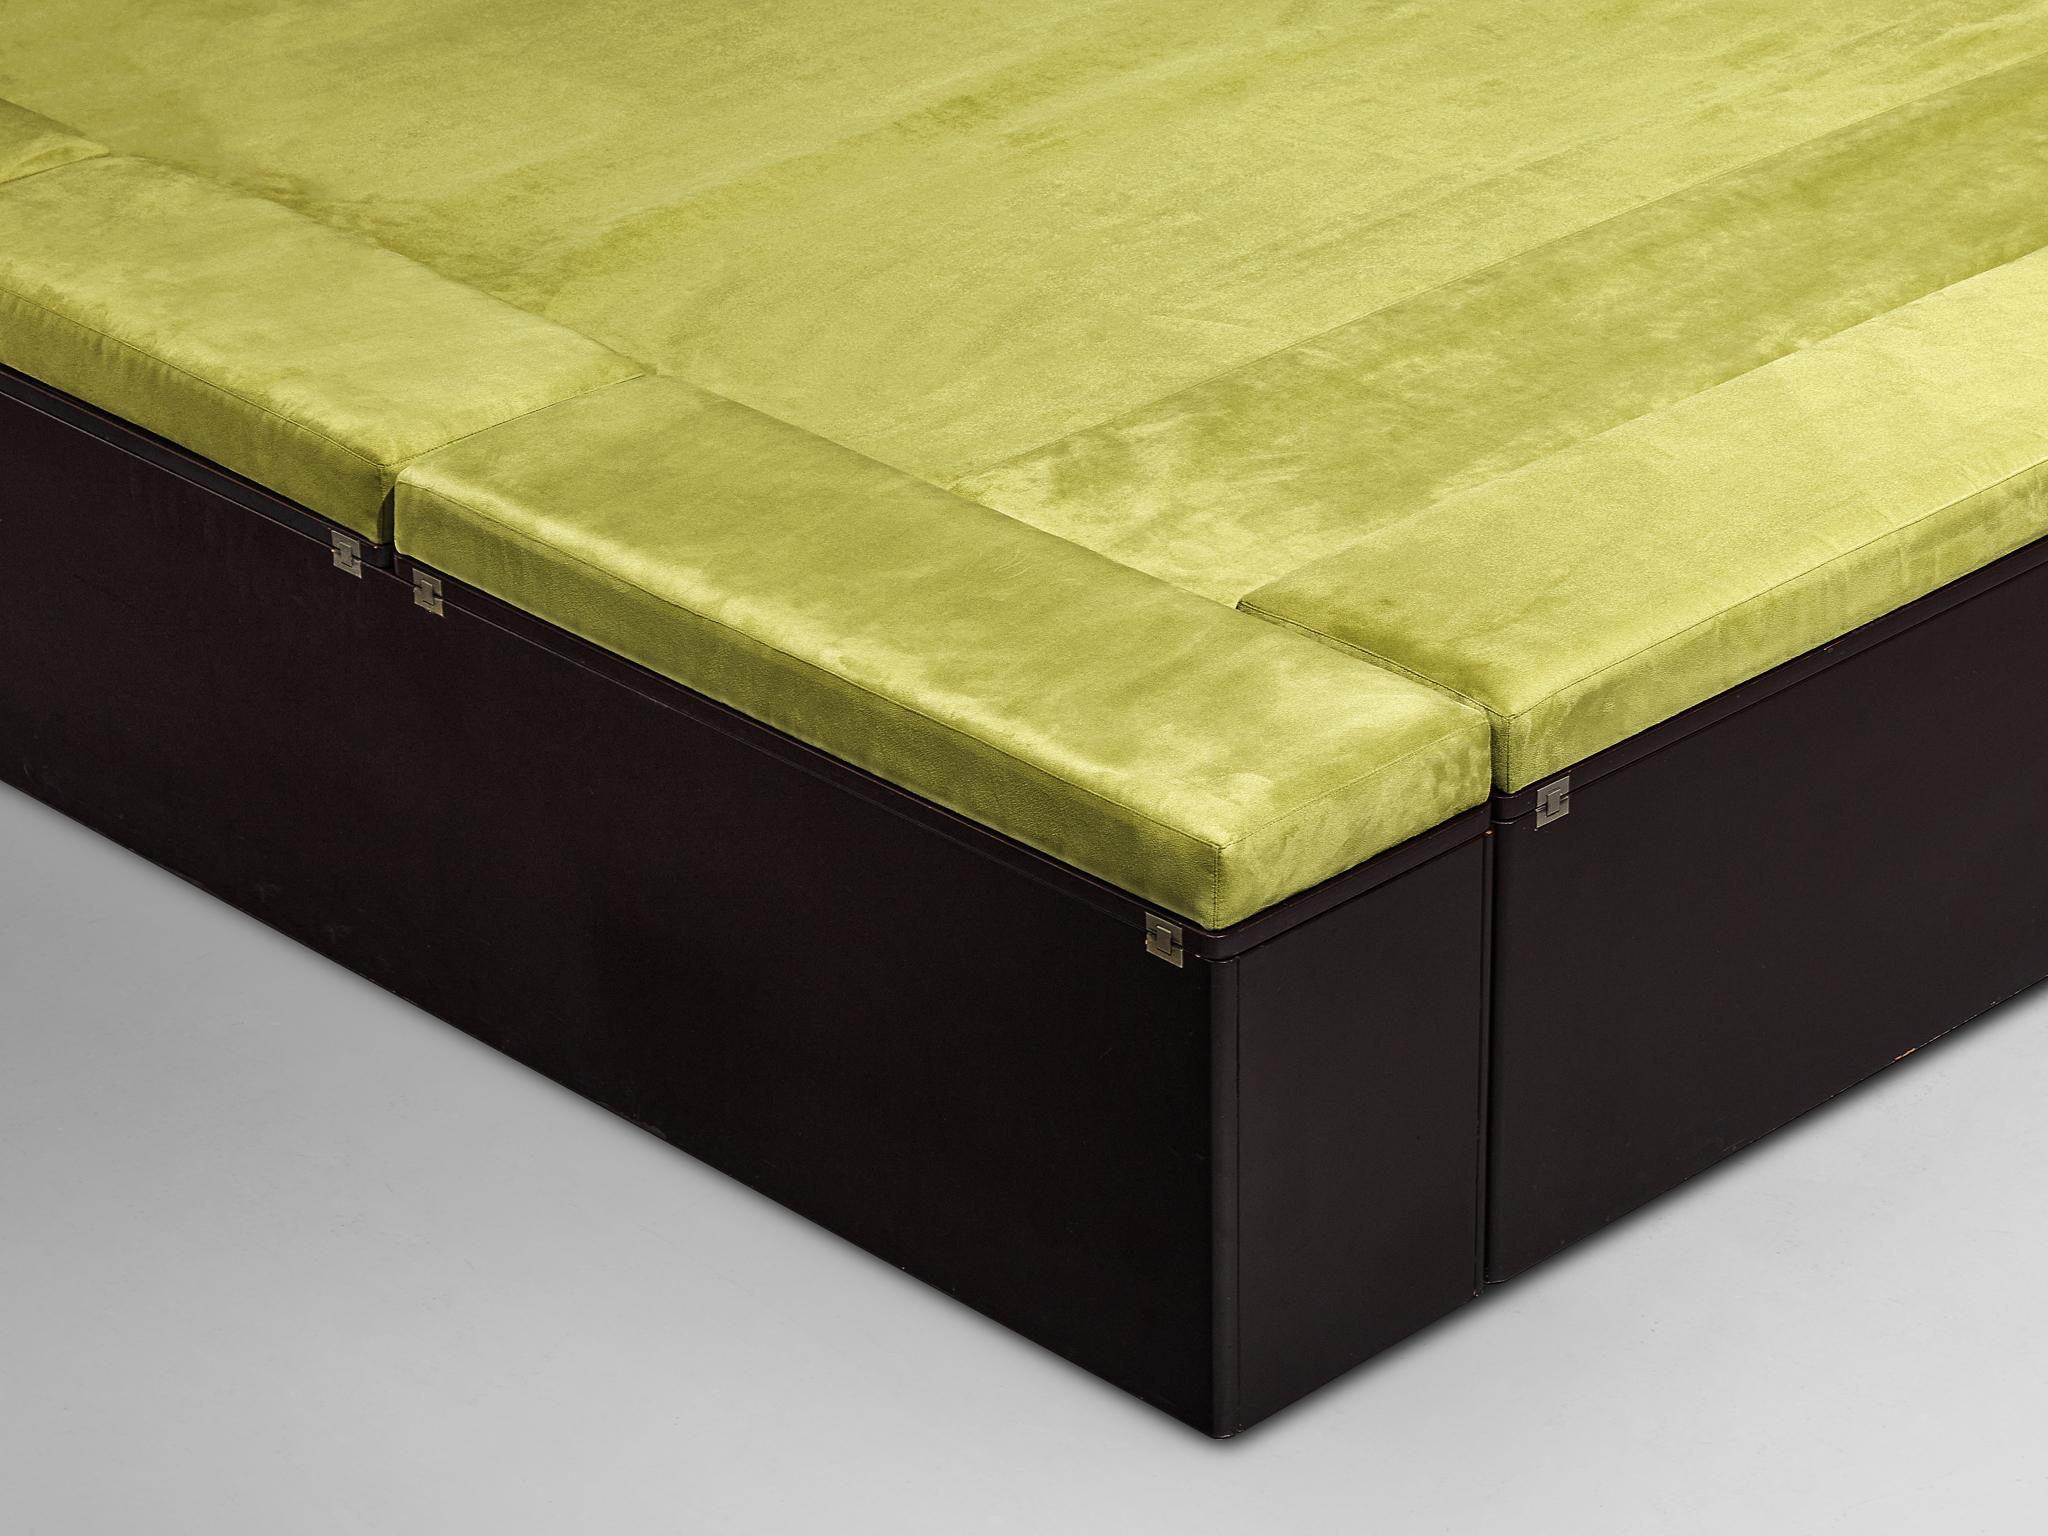 Late 20th Century Luciano Bertoncini for Cjfra 'Zattera' Bed in Alcantara and Lacquered Wood  For Sale